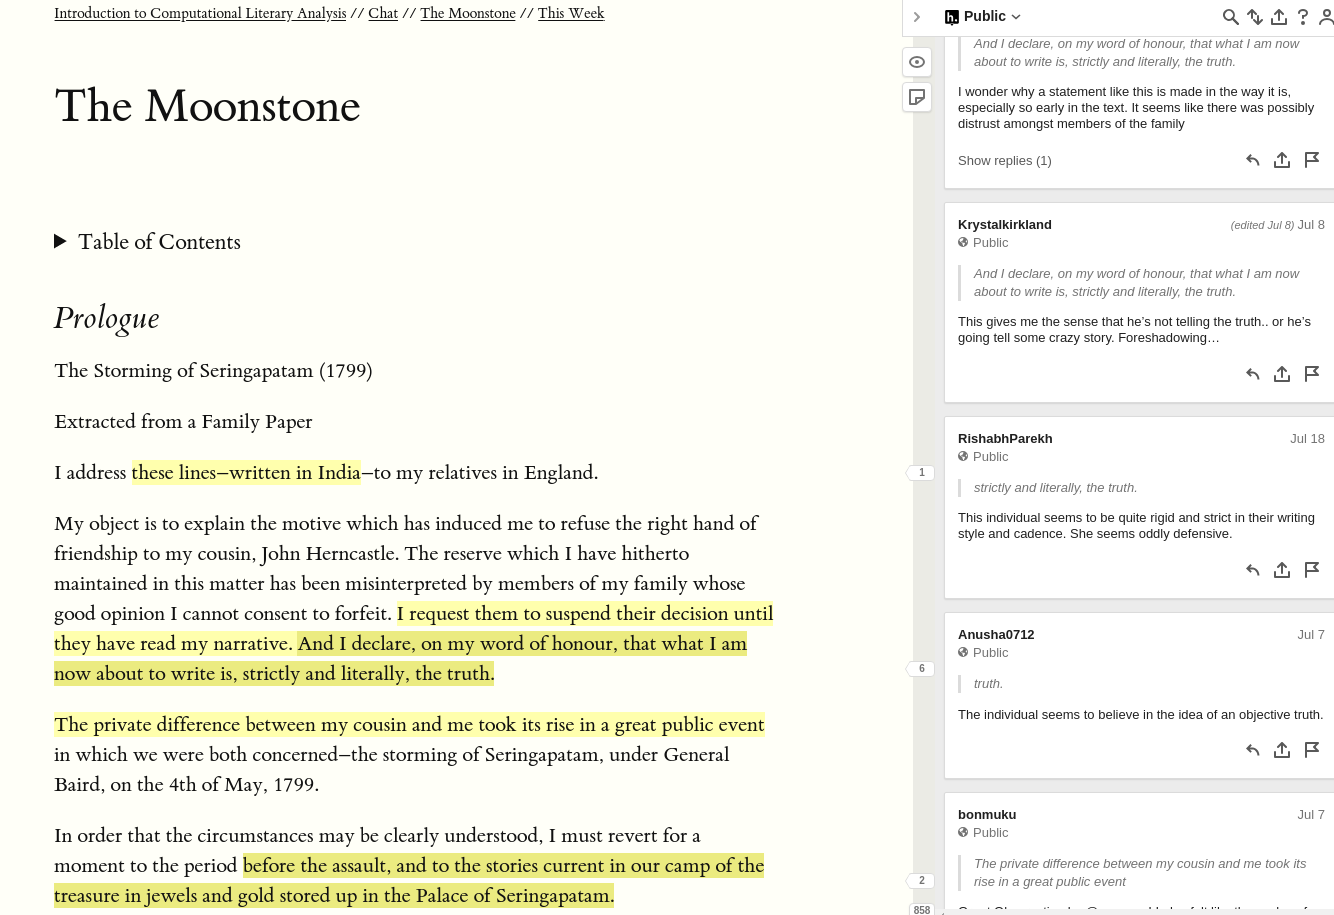 Hypothes.is-annotated edition of The Moonstone, one of our course texts.